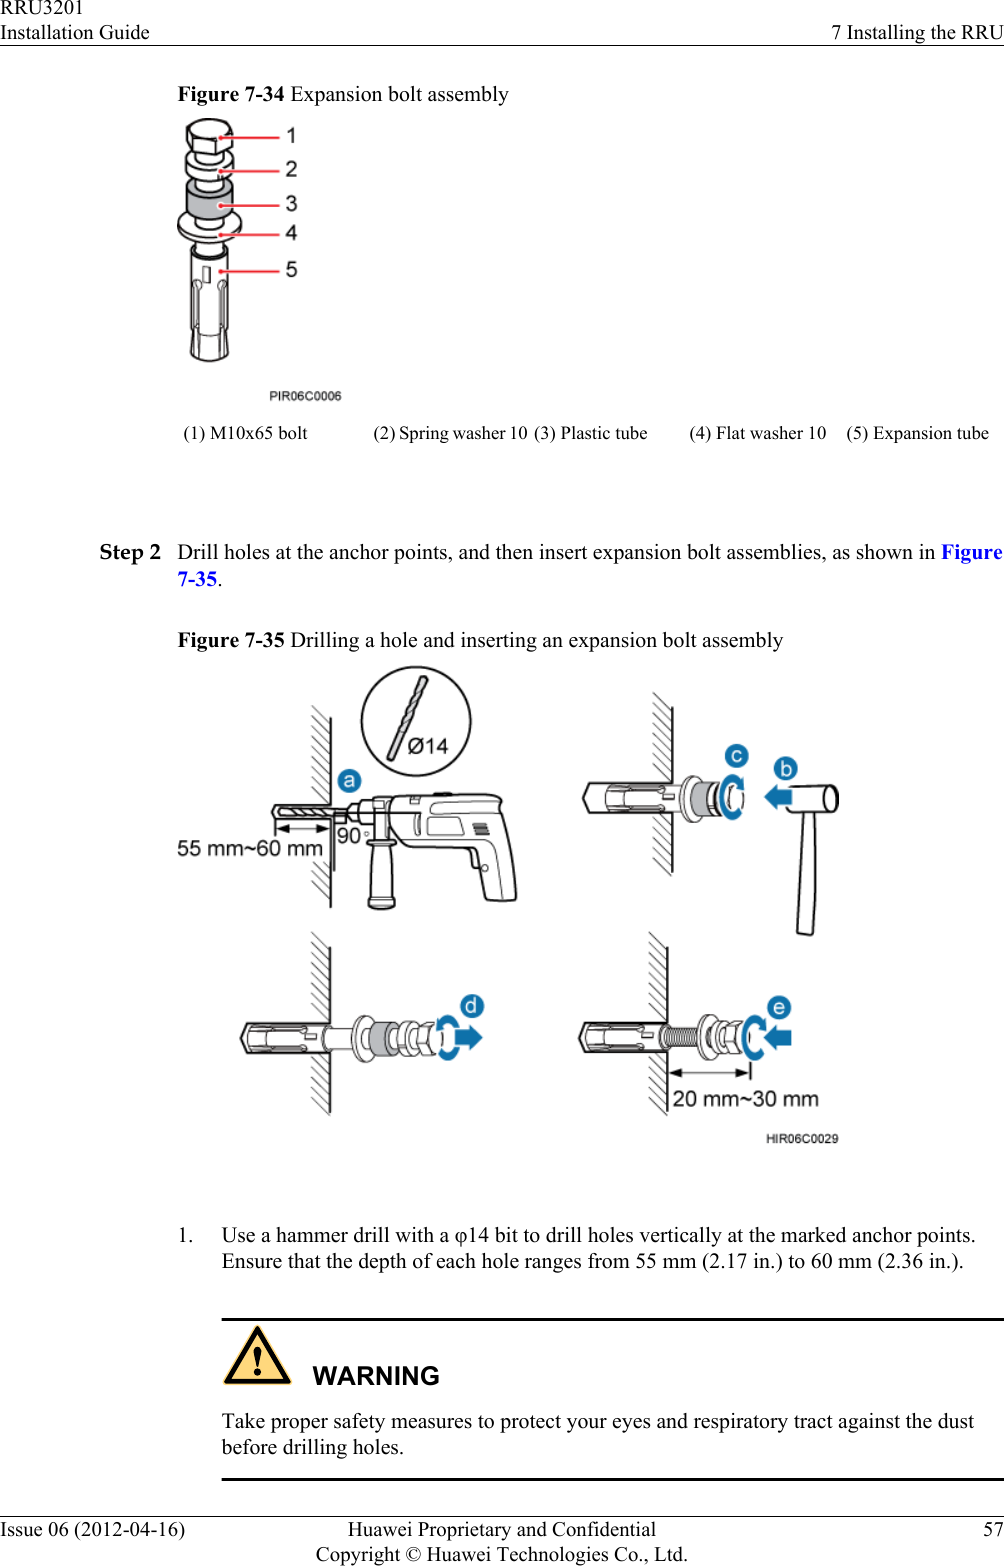 Figure 7-34 Expansion bolt assembly(1) M10x65 bolt (2) Spring washer 10 (3) Plastic tube (4) Flat washer 10 (5) Expansion tube Step 2 Drill holes at the anchor points, and then insert expansion bolt assemblies, as shown in Figure7-35.Figure 7-35 Drilling a hole and inserting an expansion bolt assembly 1. Use a hammer drill with a φ14 bit to drill holes vertically at the marked anchor points.Ensure that the depth of each hole ranges from 55 mm (2.17 in.) to 60 mm (2.36 in.).WARNINGTake proper safety measures to protect your eyes and respiratory tract against the dustbefore drilling holes.RRU3201Installation Guide 7 Installing the RRUIssue 06 (2012-04-16) Huawei Proprietary and ConfidentialCopyright © Huawei Technologies Co., Ltd.57